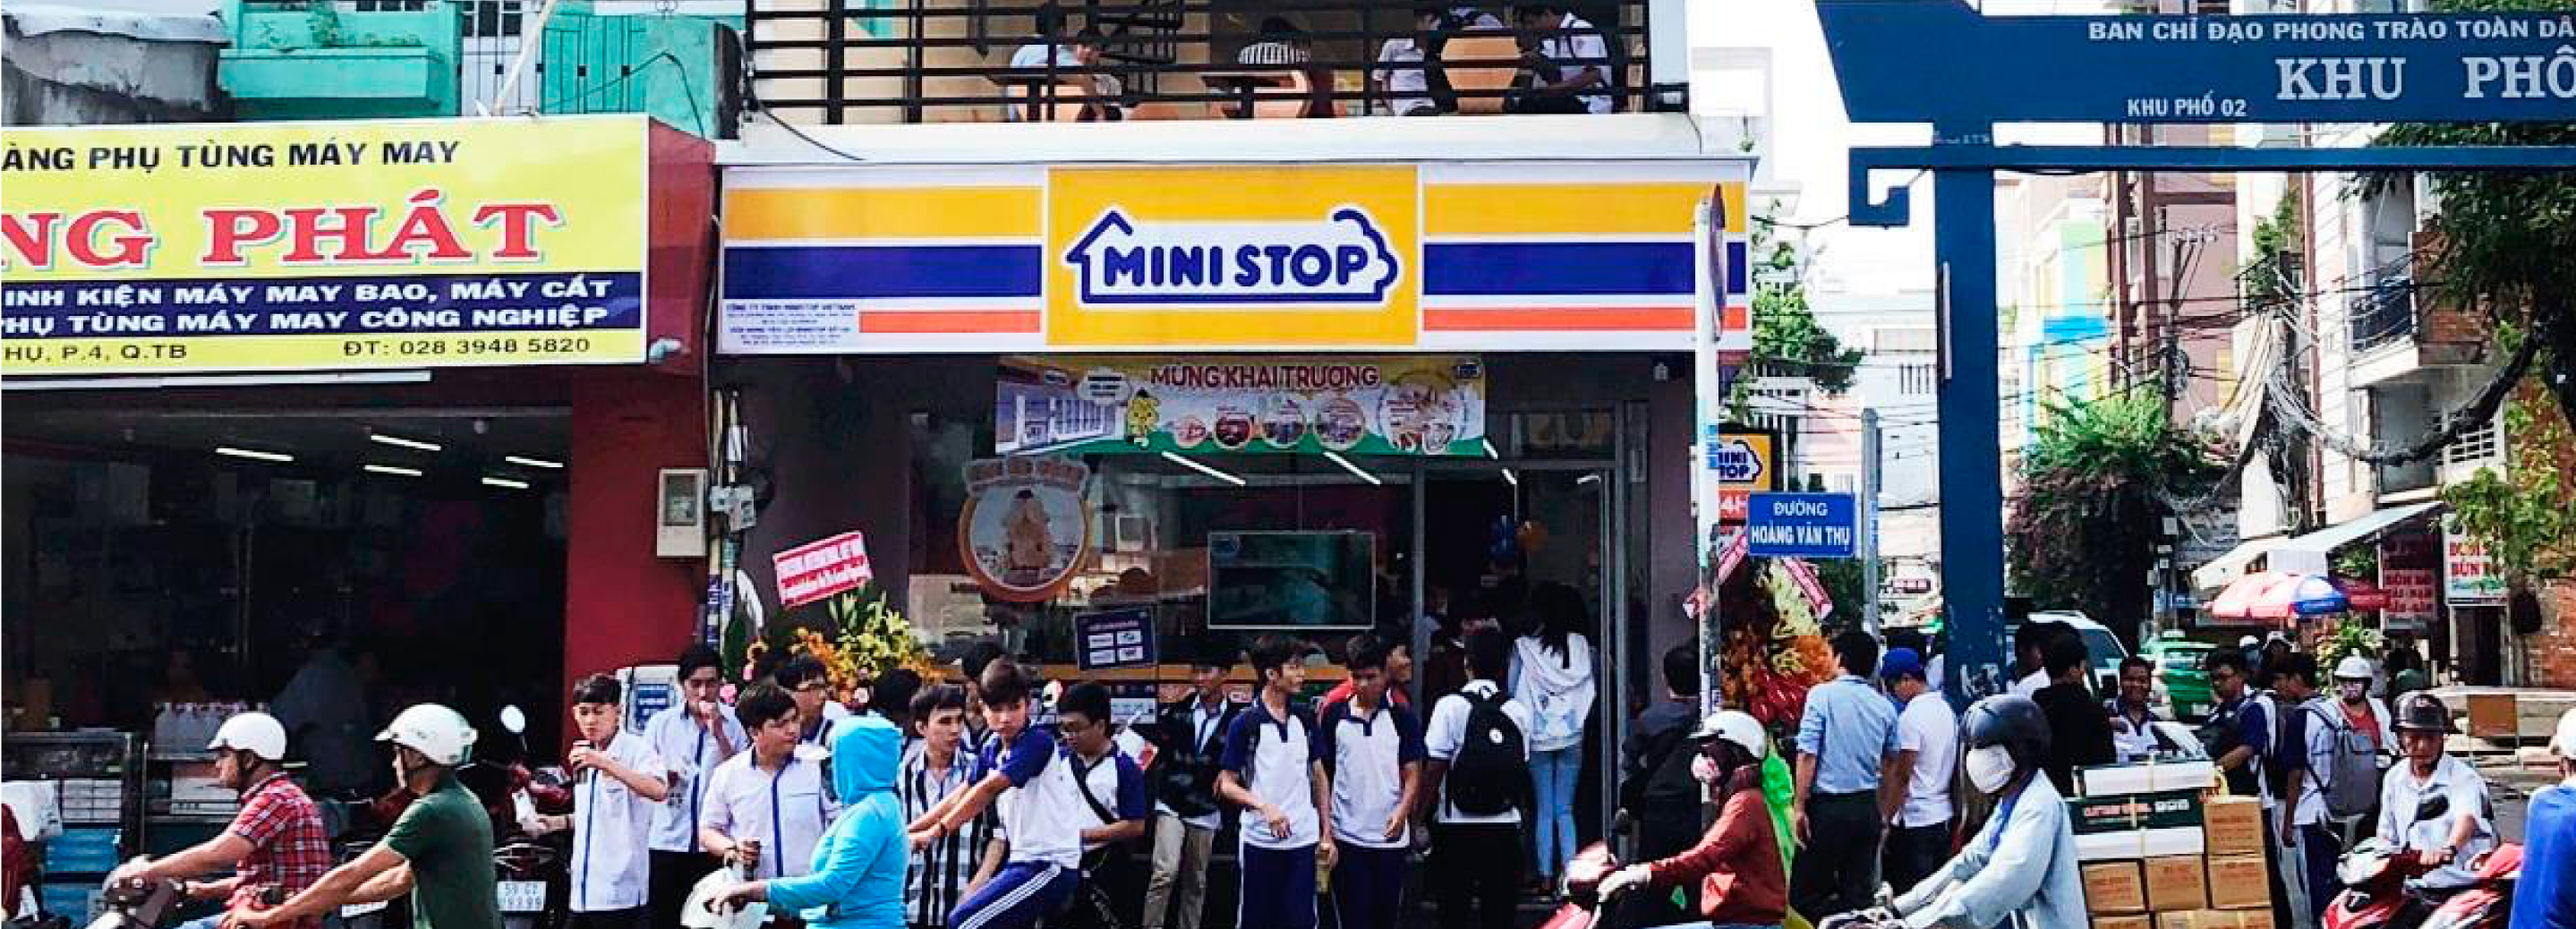 Ministop stores in Ho Chi Minh City